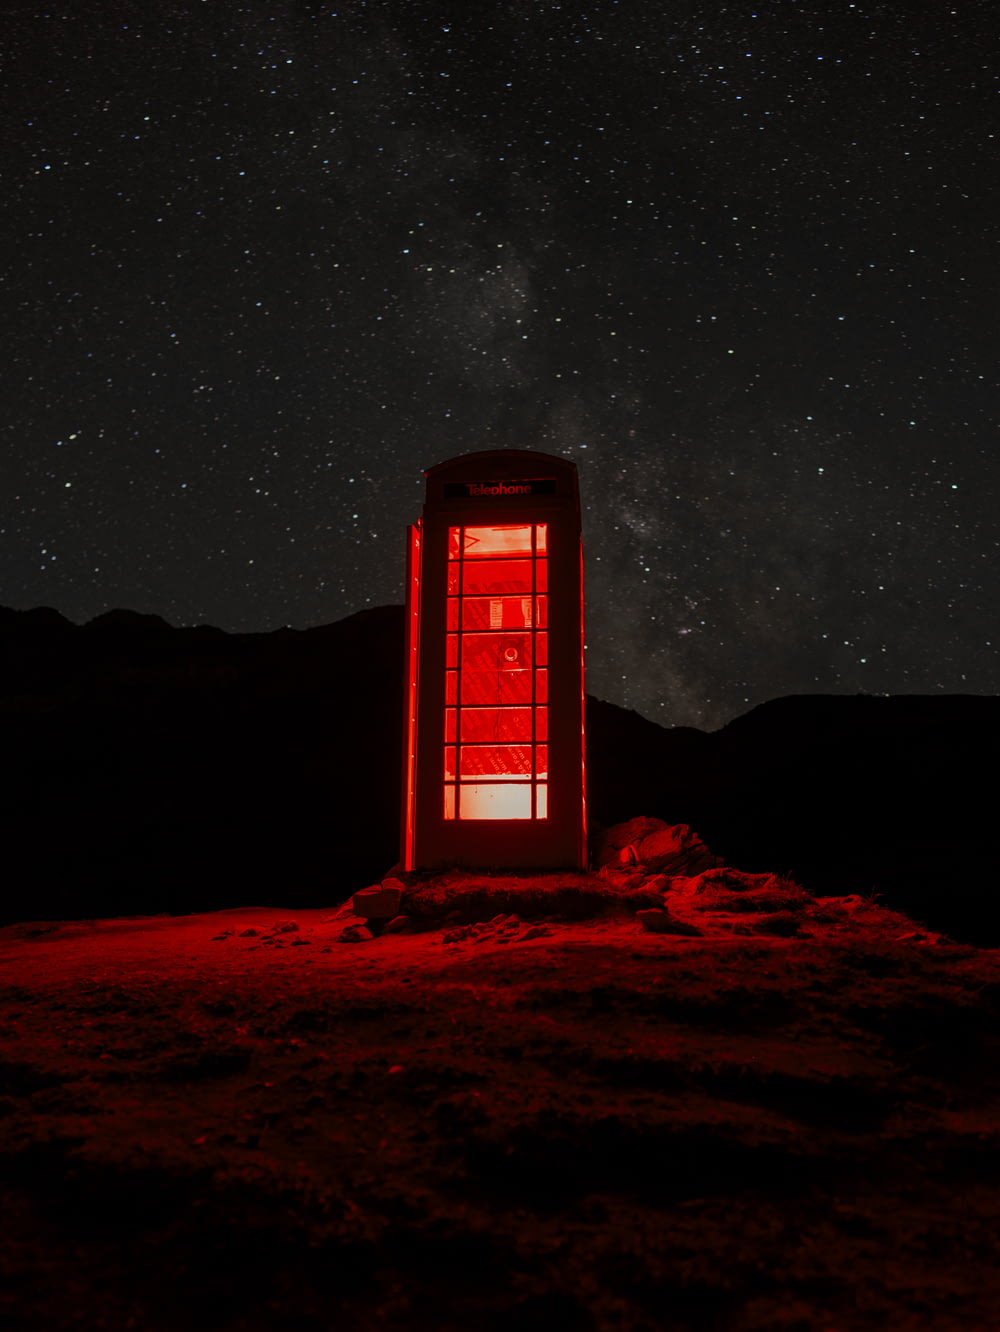 a red phone booth sitting on top of a hill under a night sky